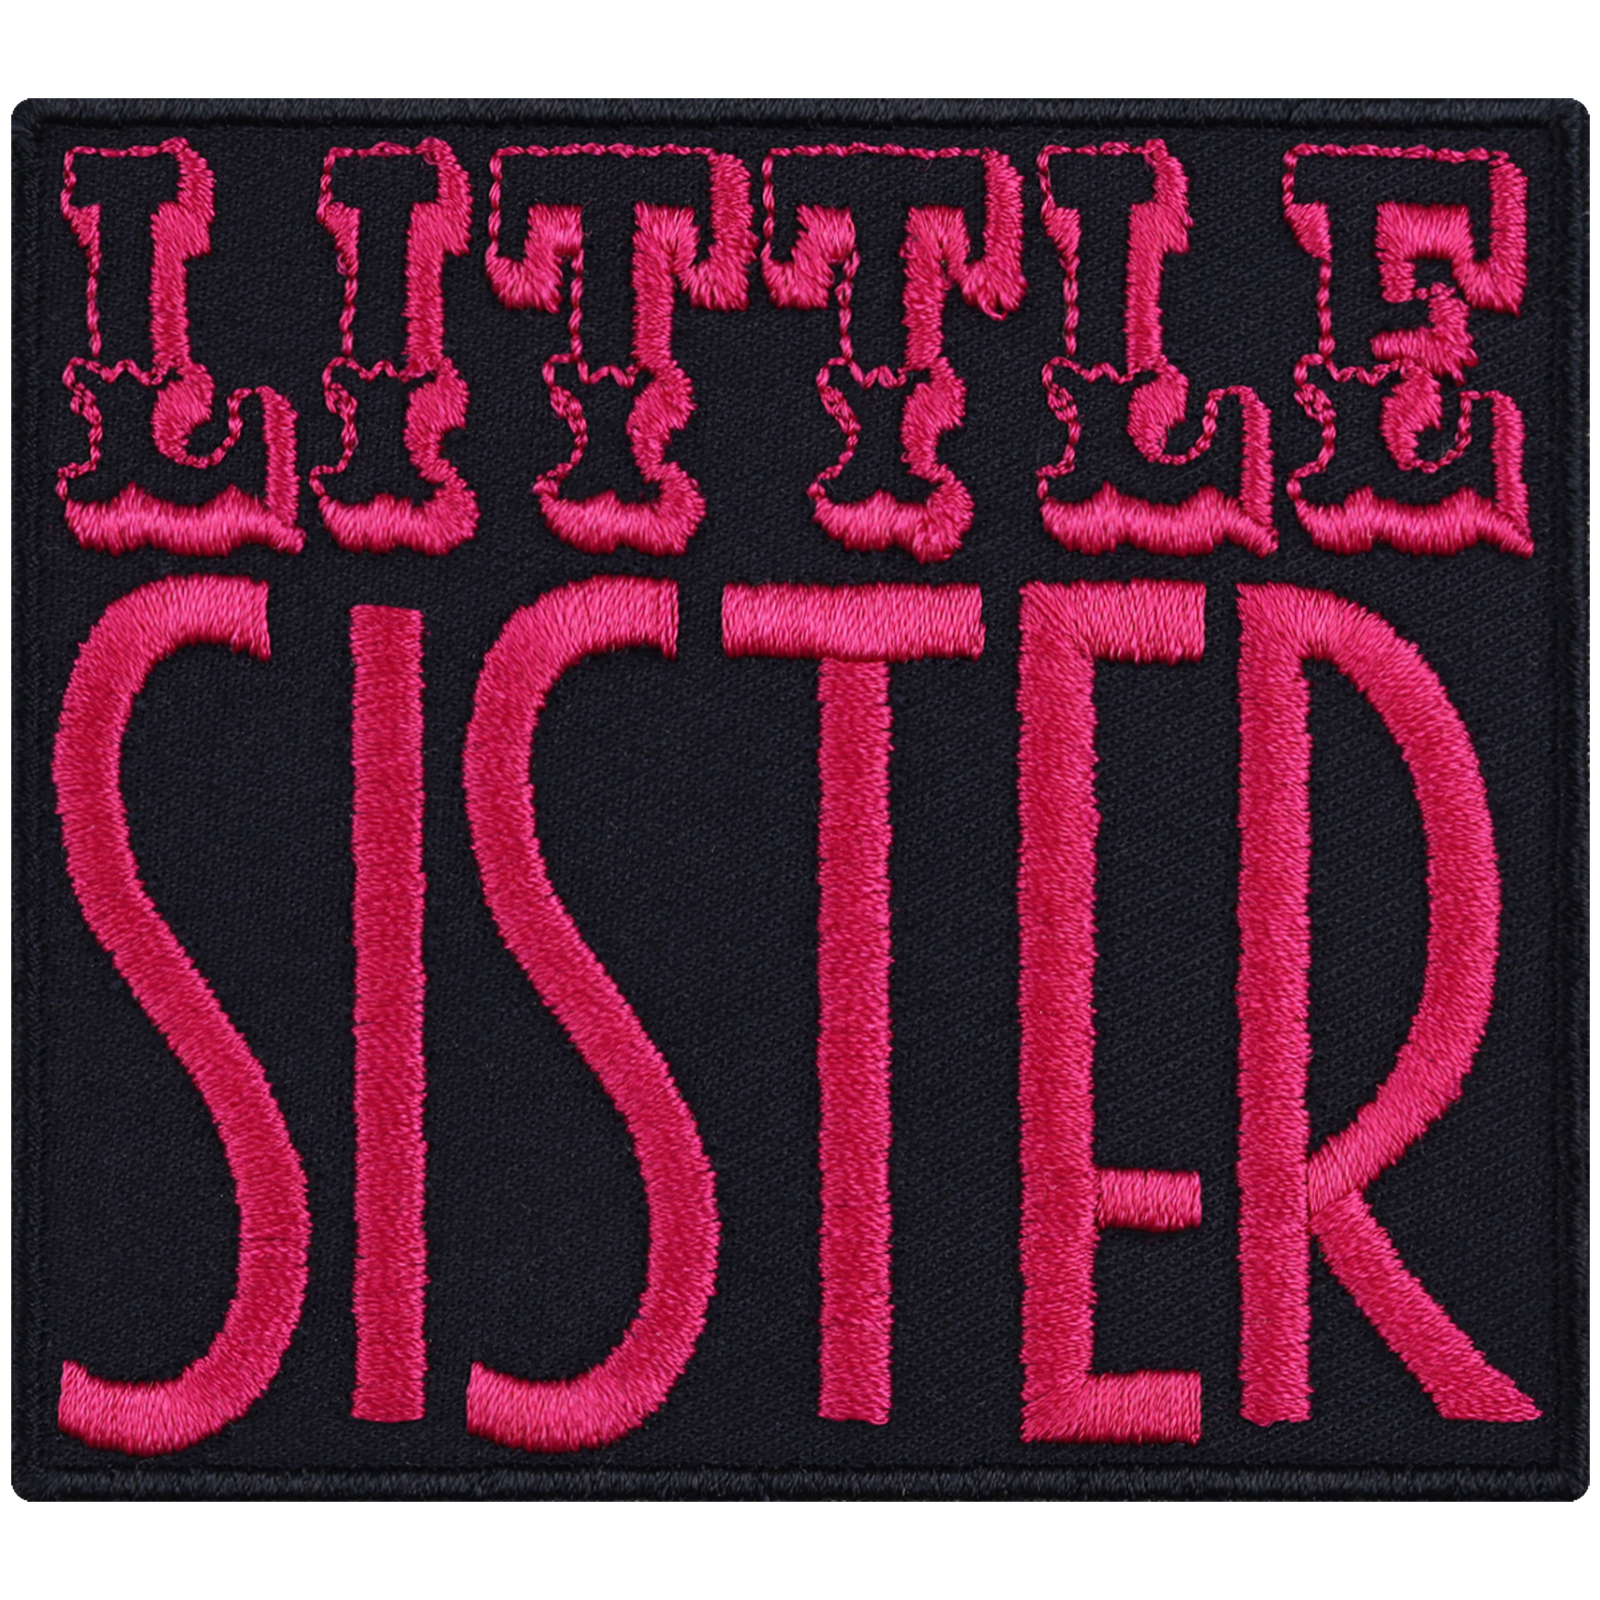 Little sister - Patch